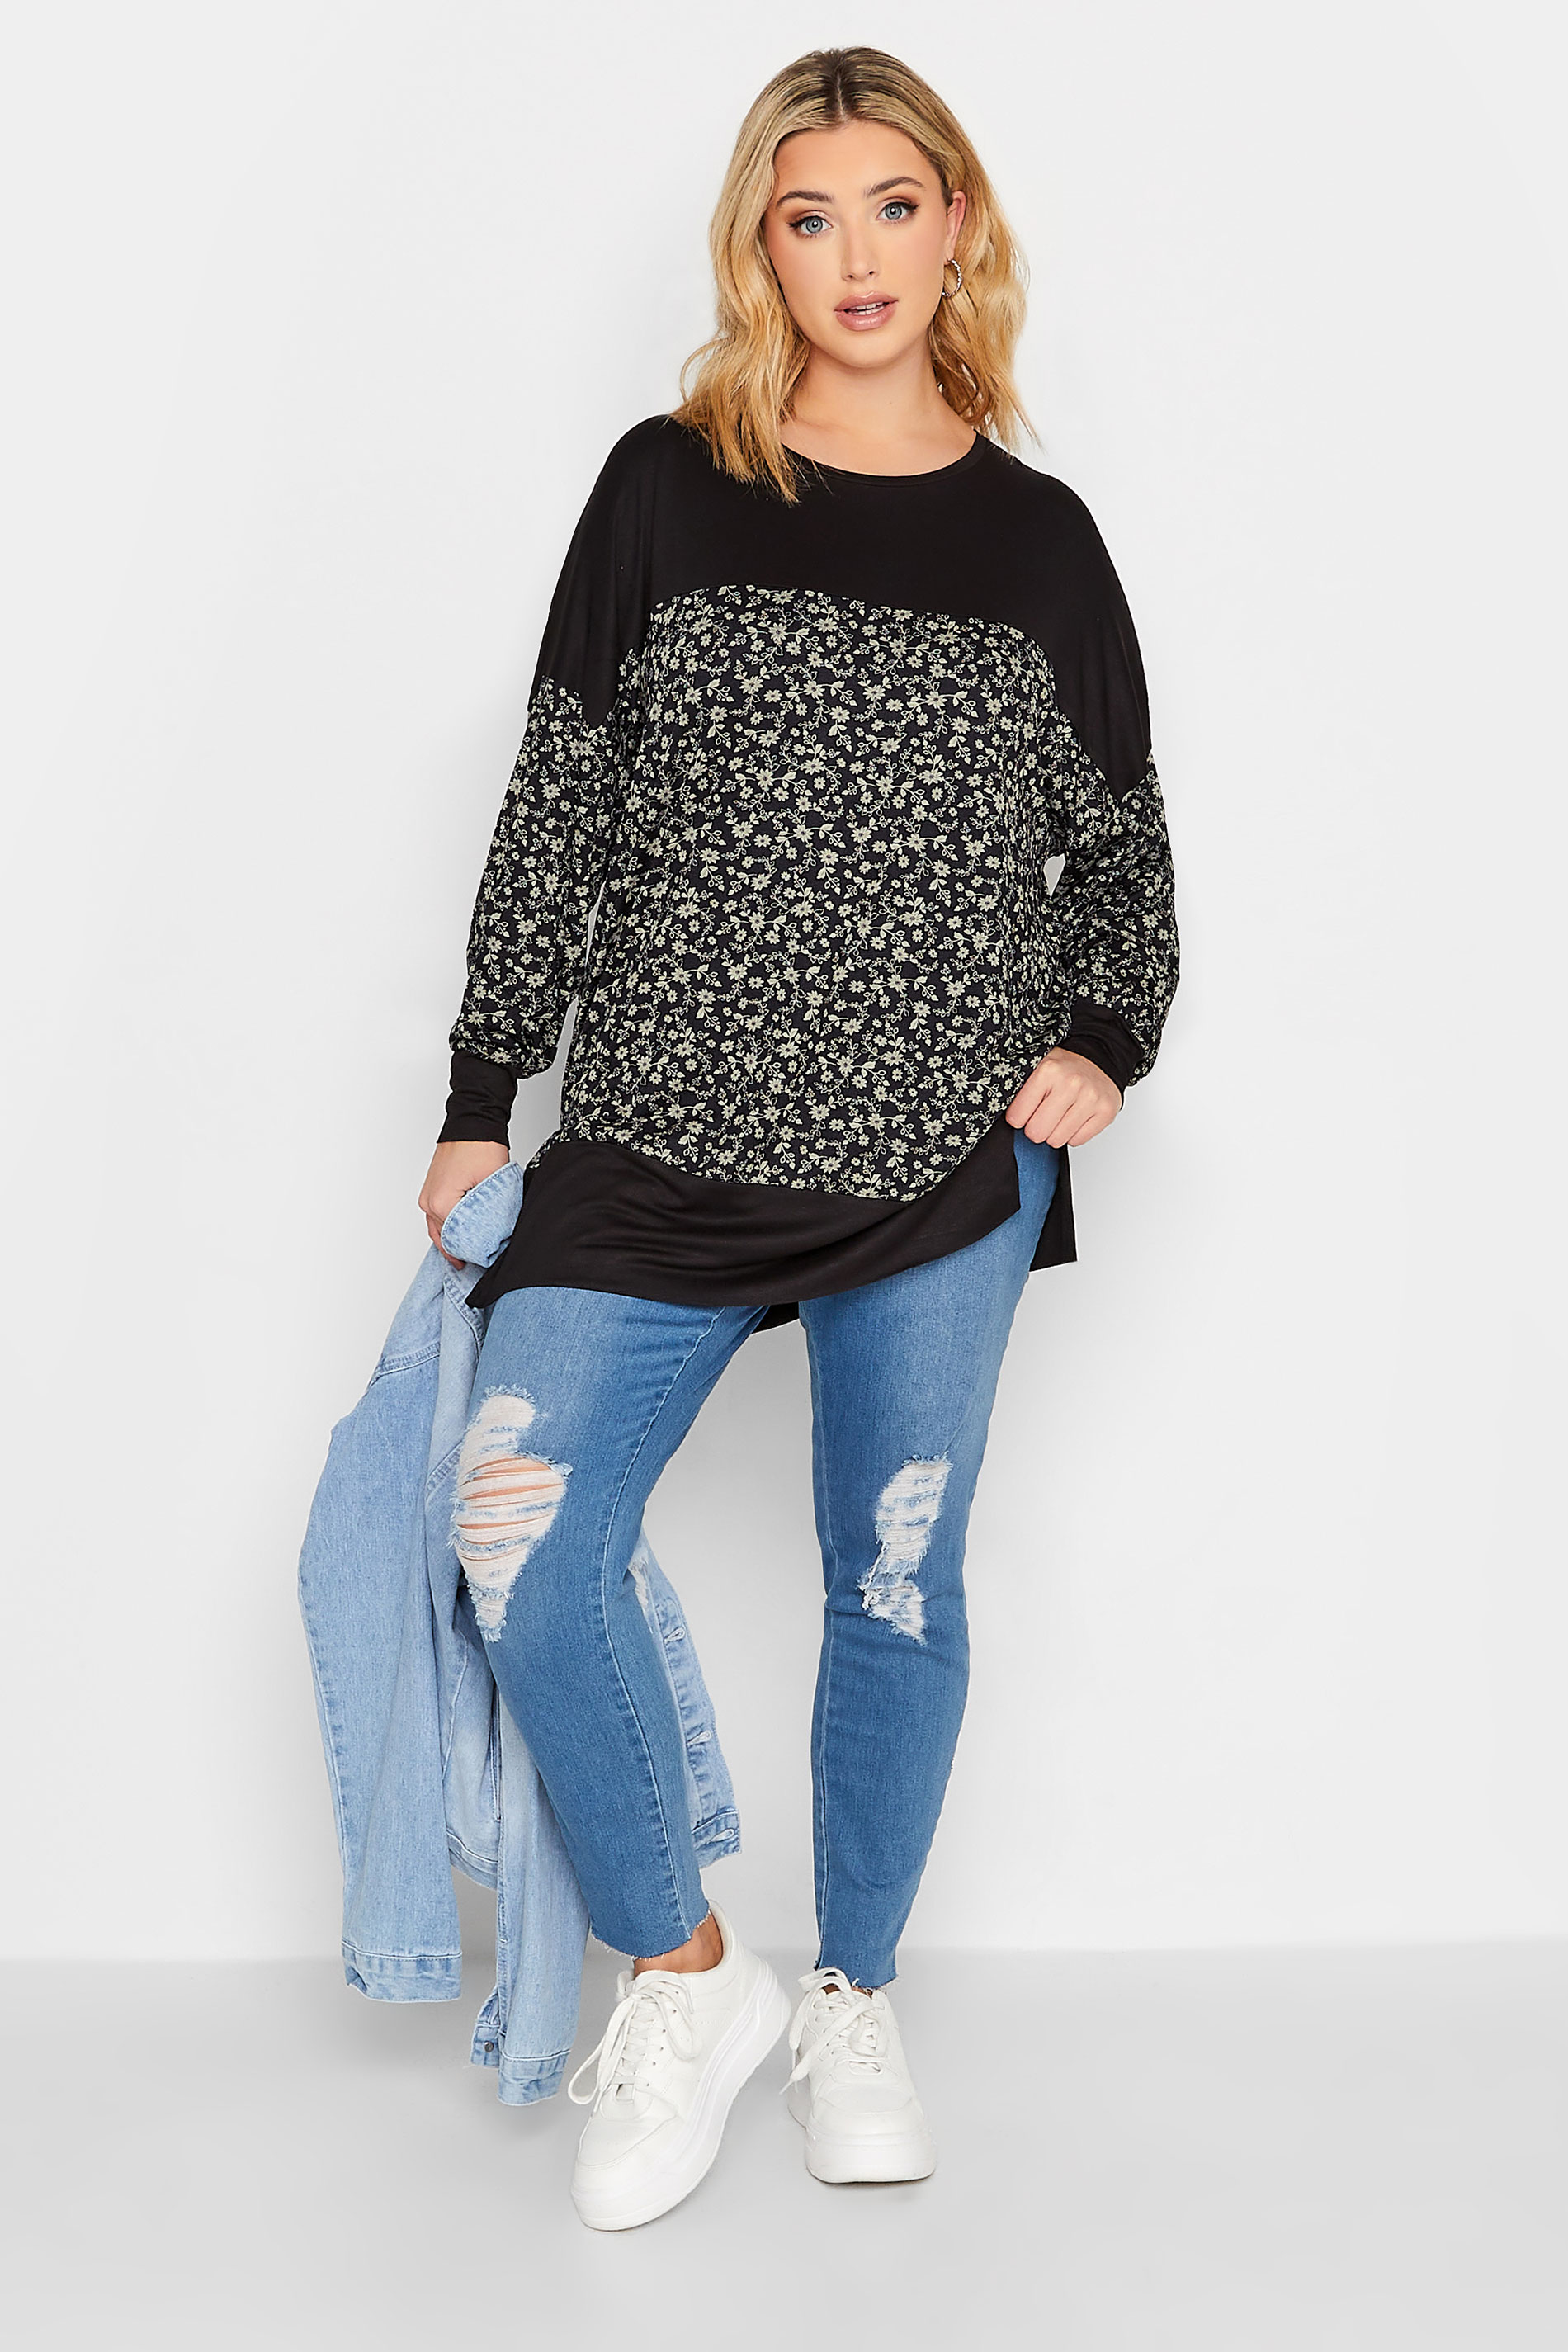 Plus Size Black Floral Print Long Sleeve Top | Yours Clothing  2